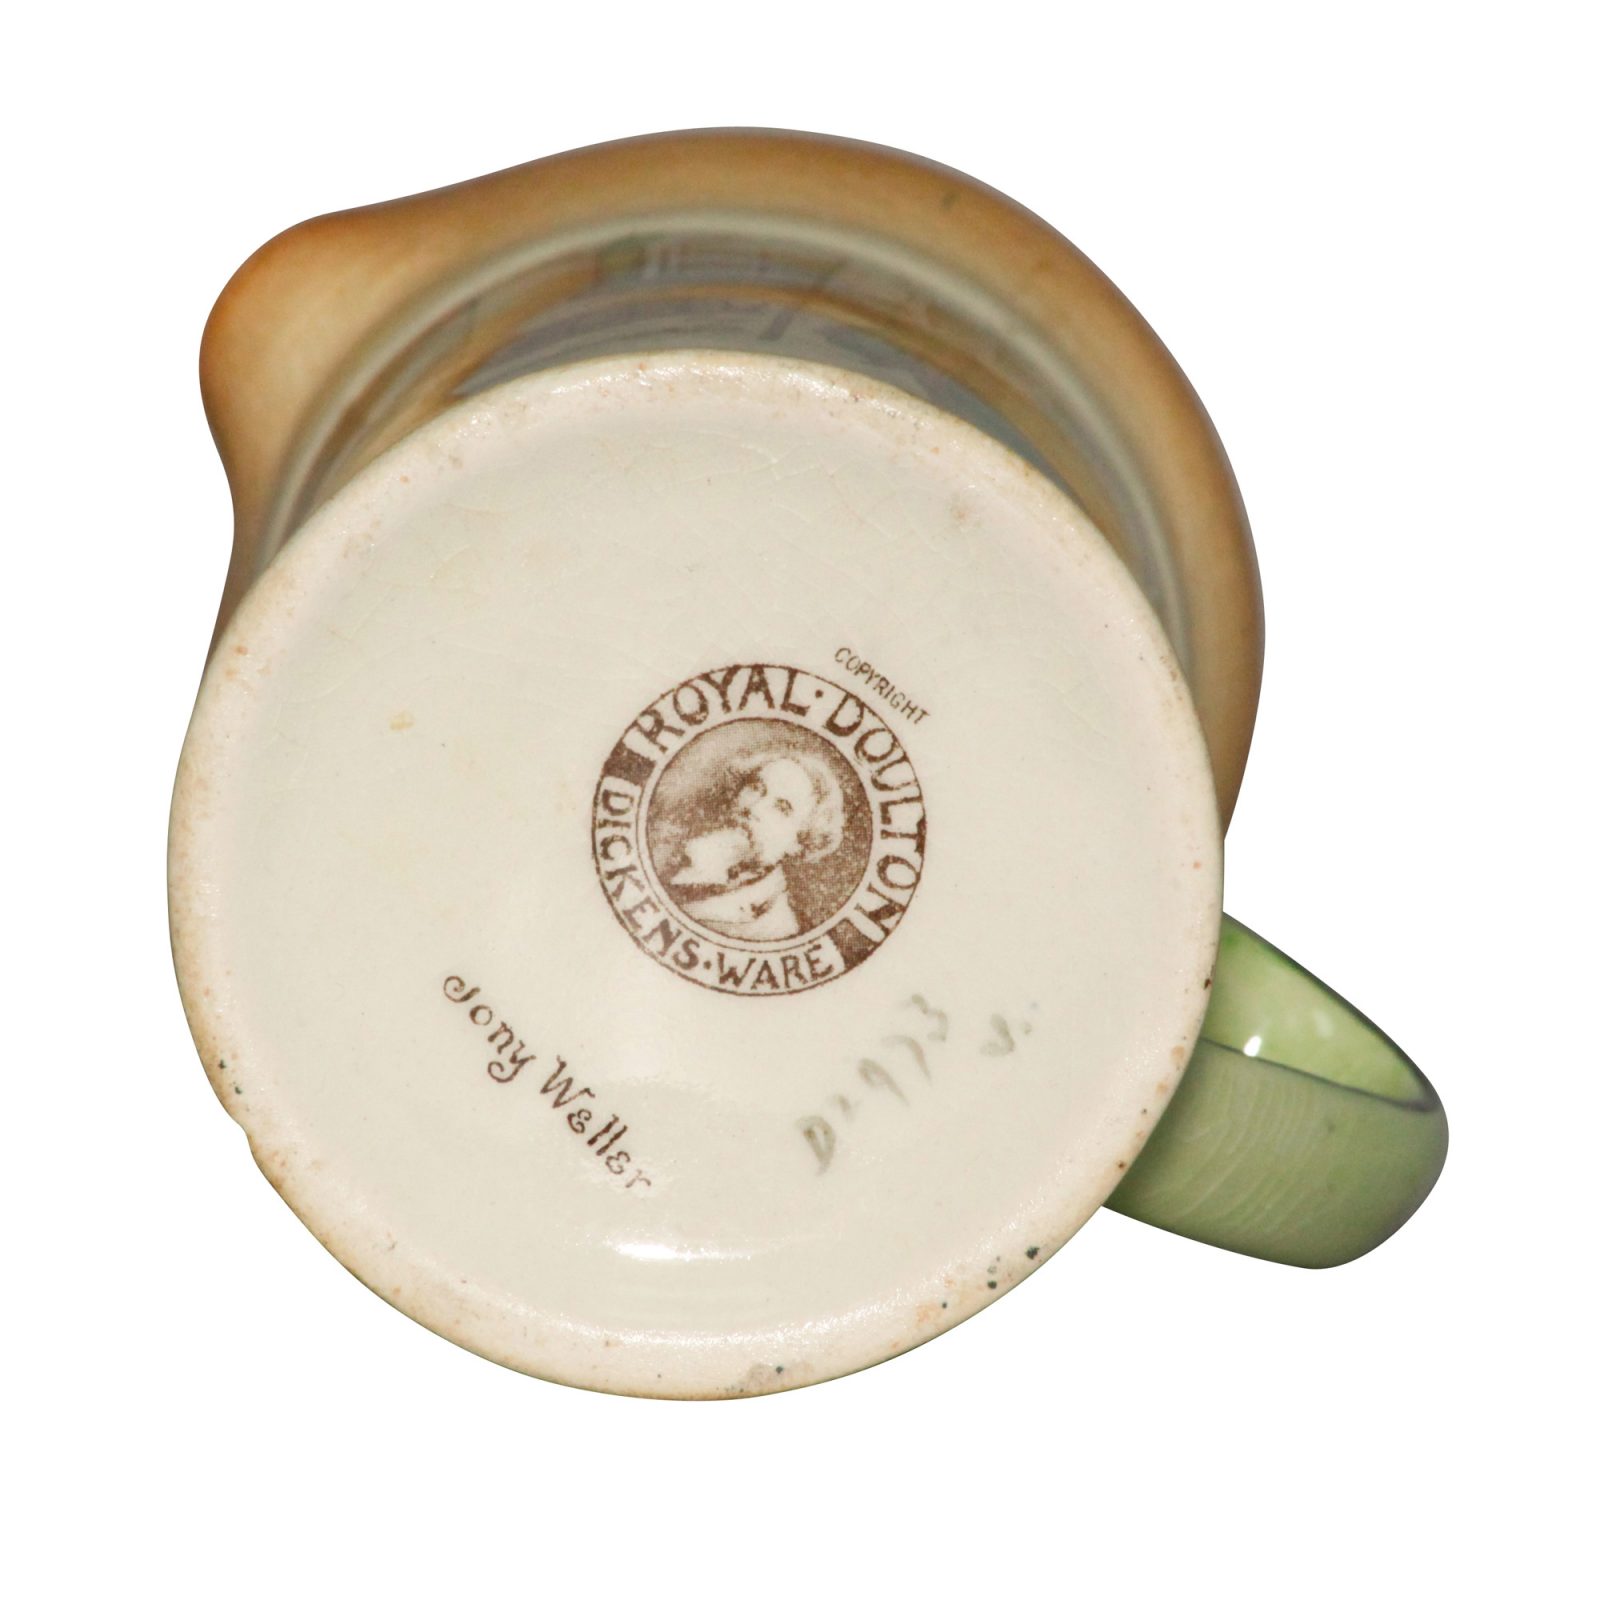 Dickens Tony Weller Pitcher 5H - Royal Doulton Seriesware